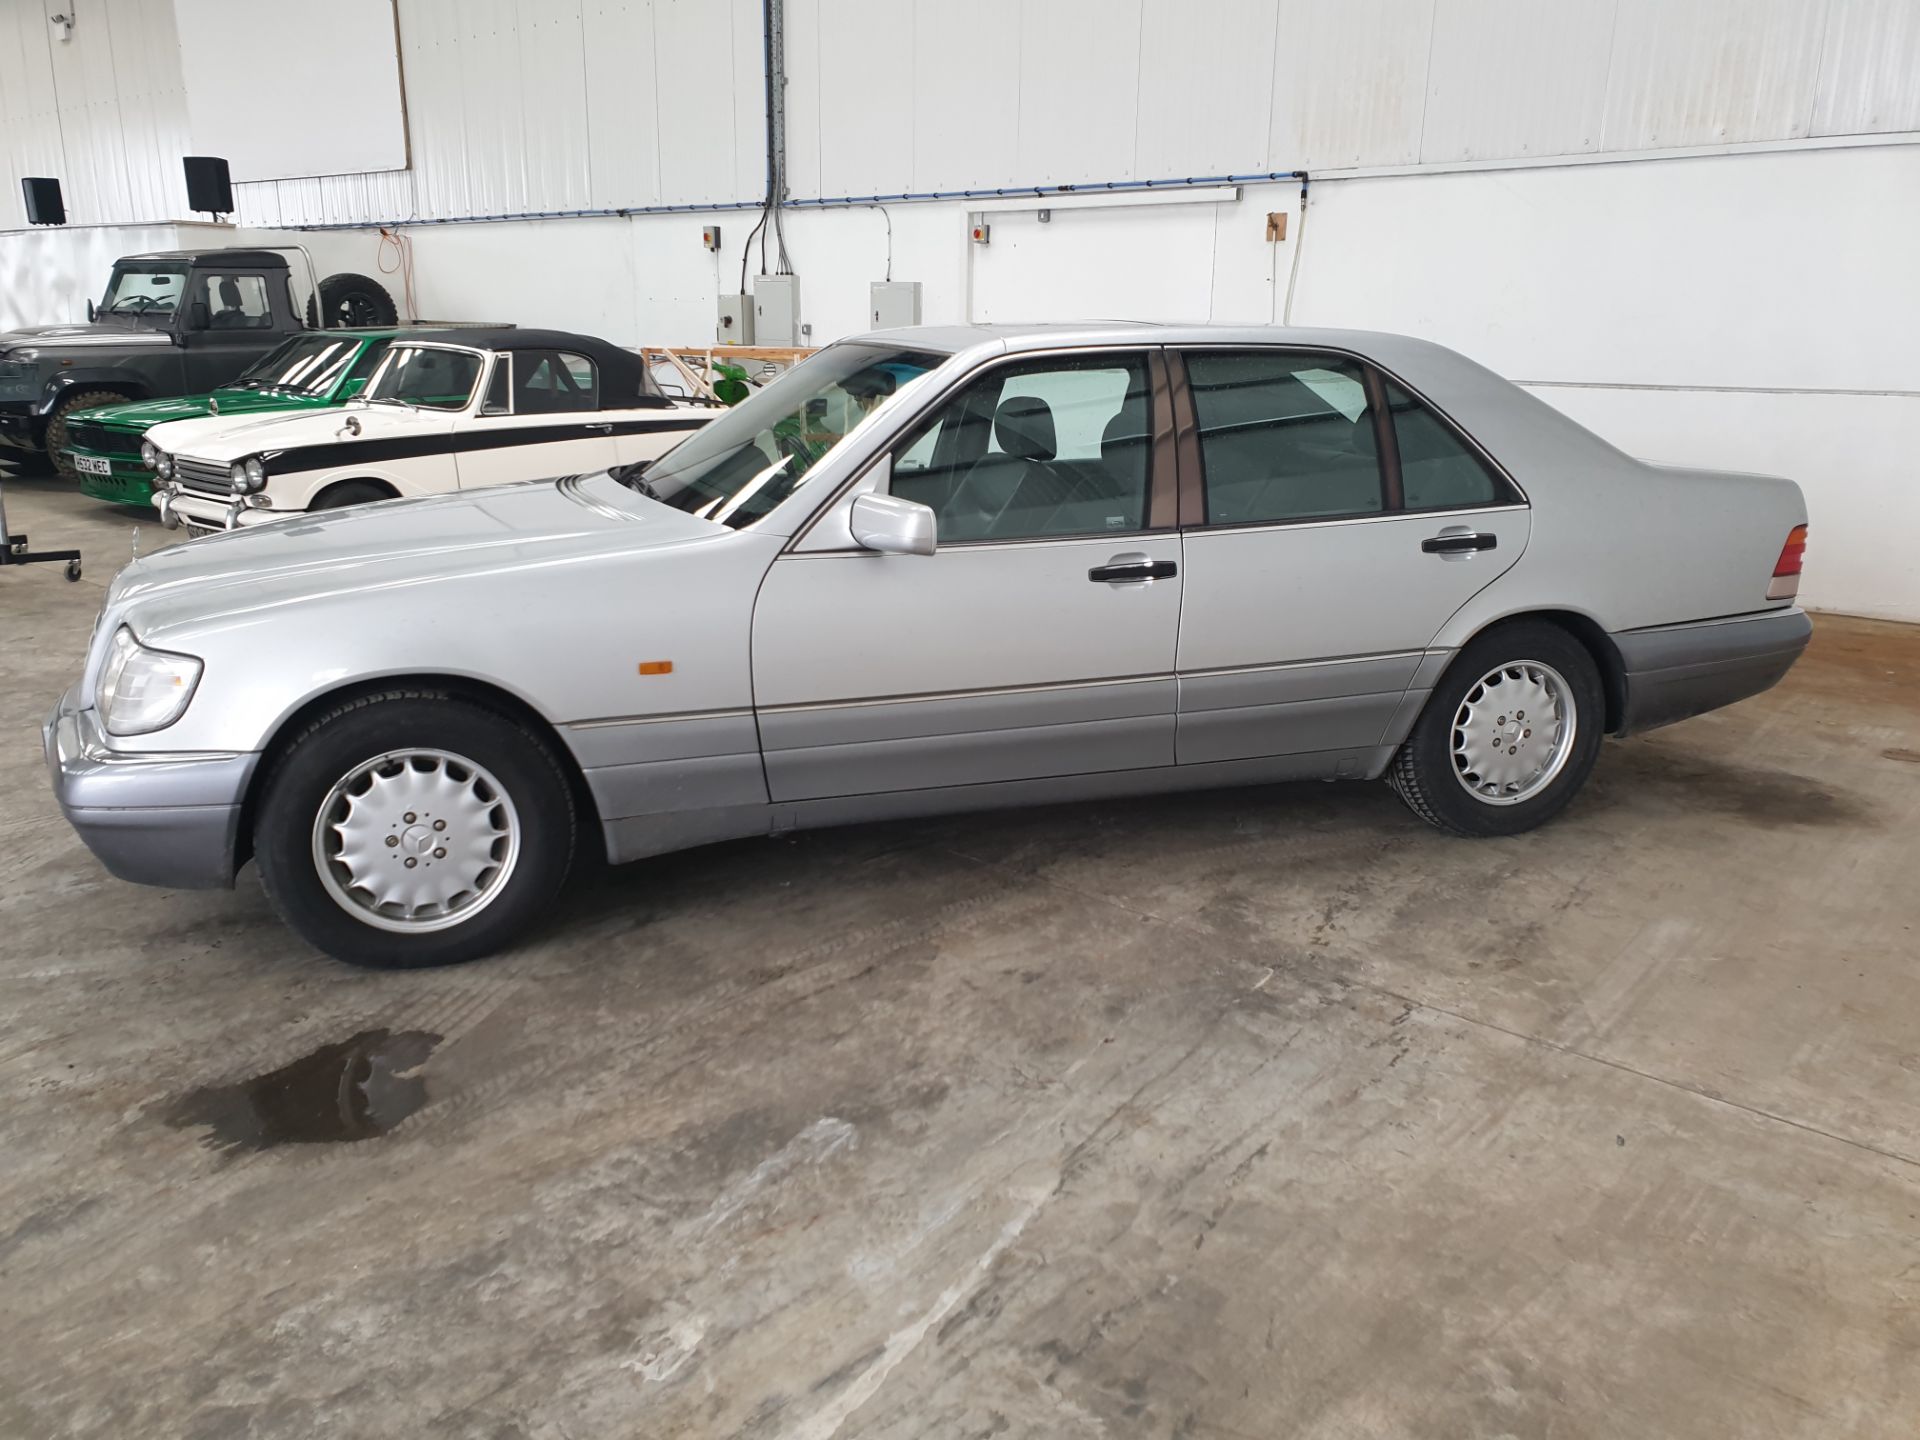 1995 Mercedes S280 - Image 6 of 14